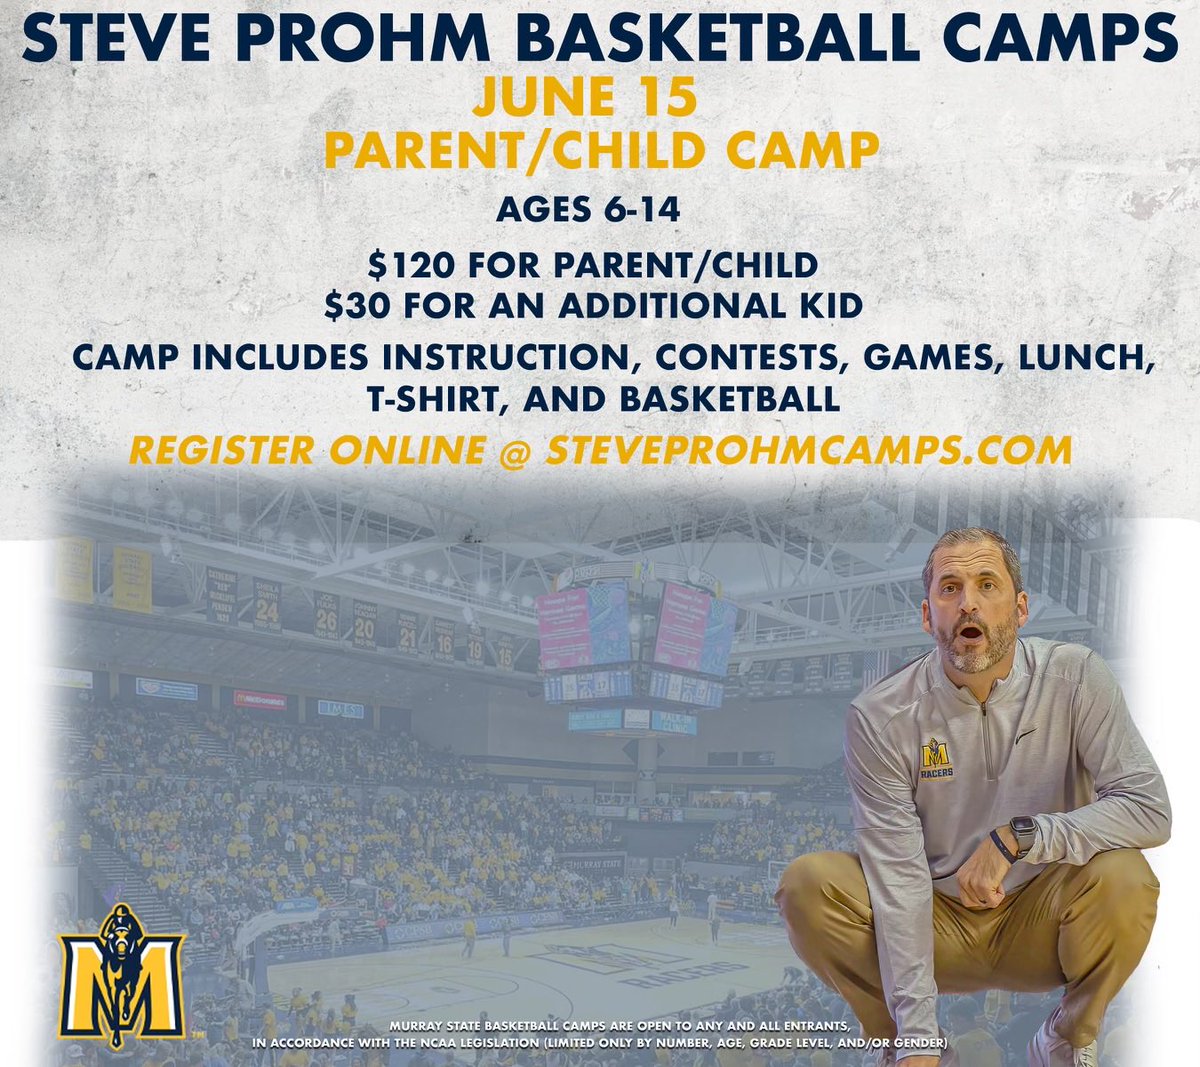 RacerNation!!! Sign up now for this special day with your son or daughter! The memories will least a lifetime and the sore muscles will be gone by the next weekend! lol